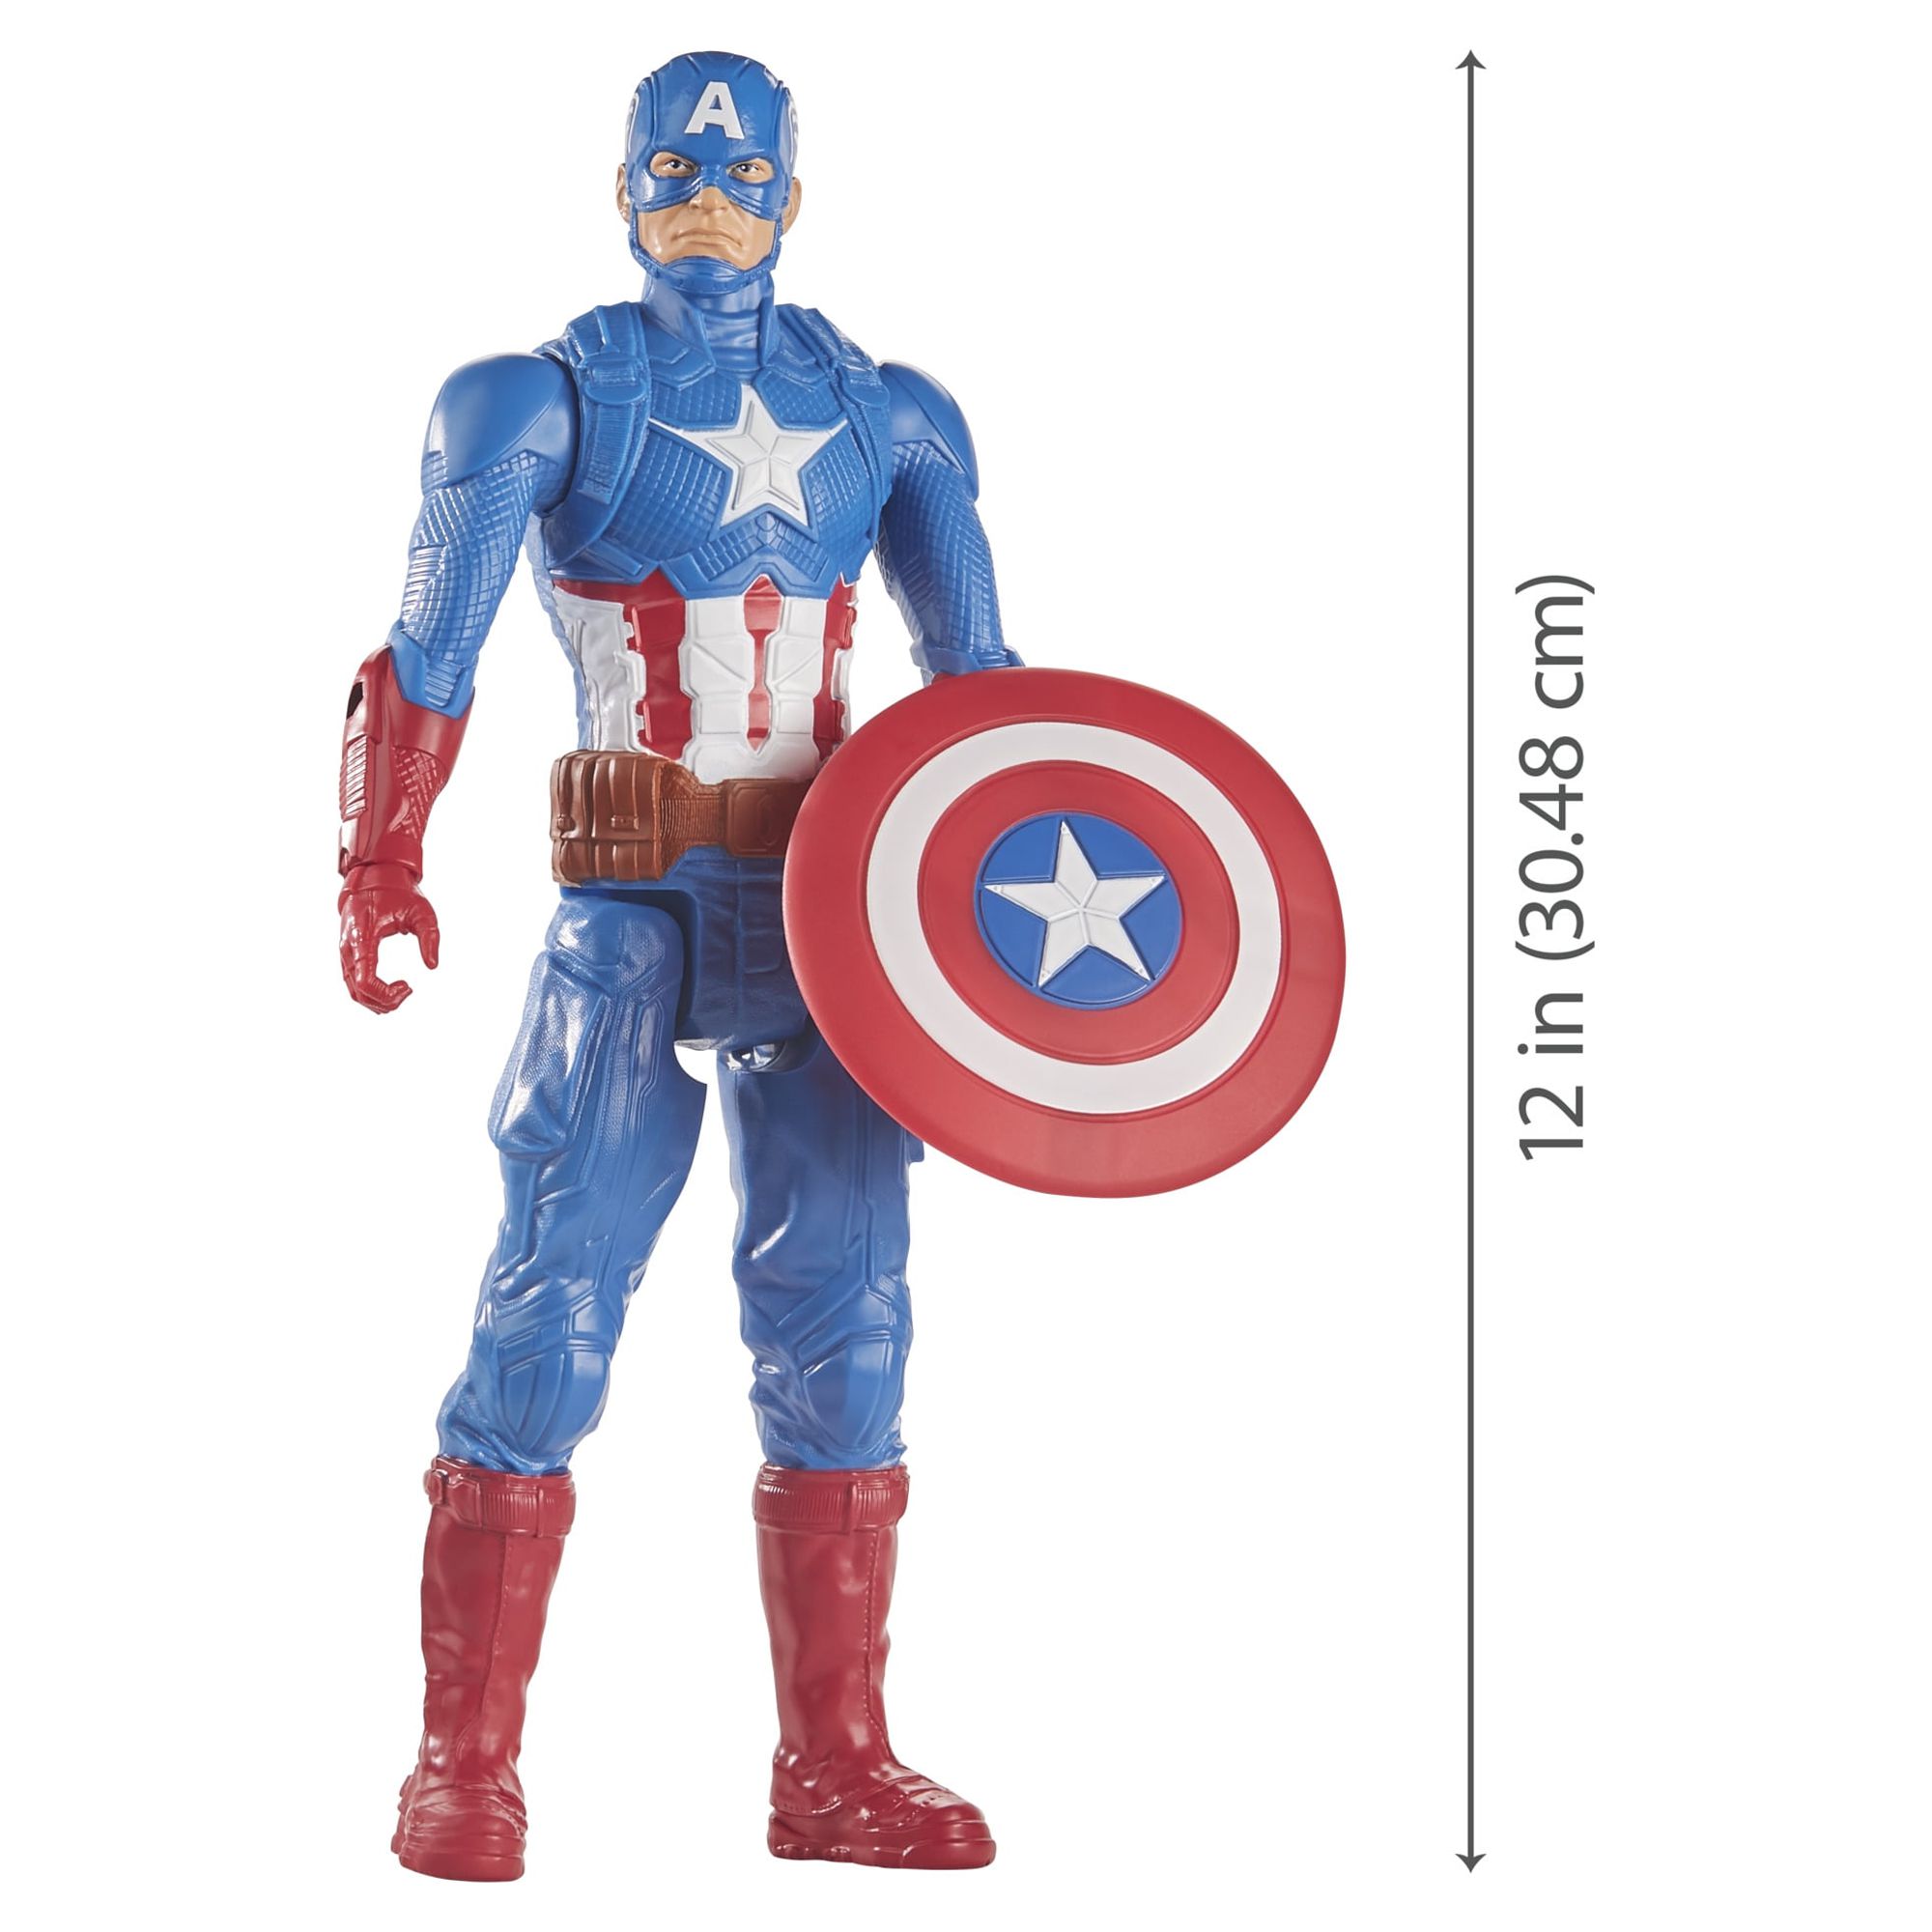 Marvel: Avengers Titan Hero Series Captain America Kids Toy Action Figure for Boys and Girls Ages 4 5 6 7 8 and Up (12”) - image 2 of 8